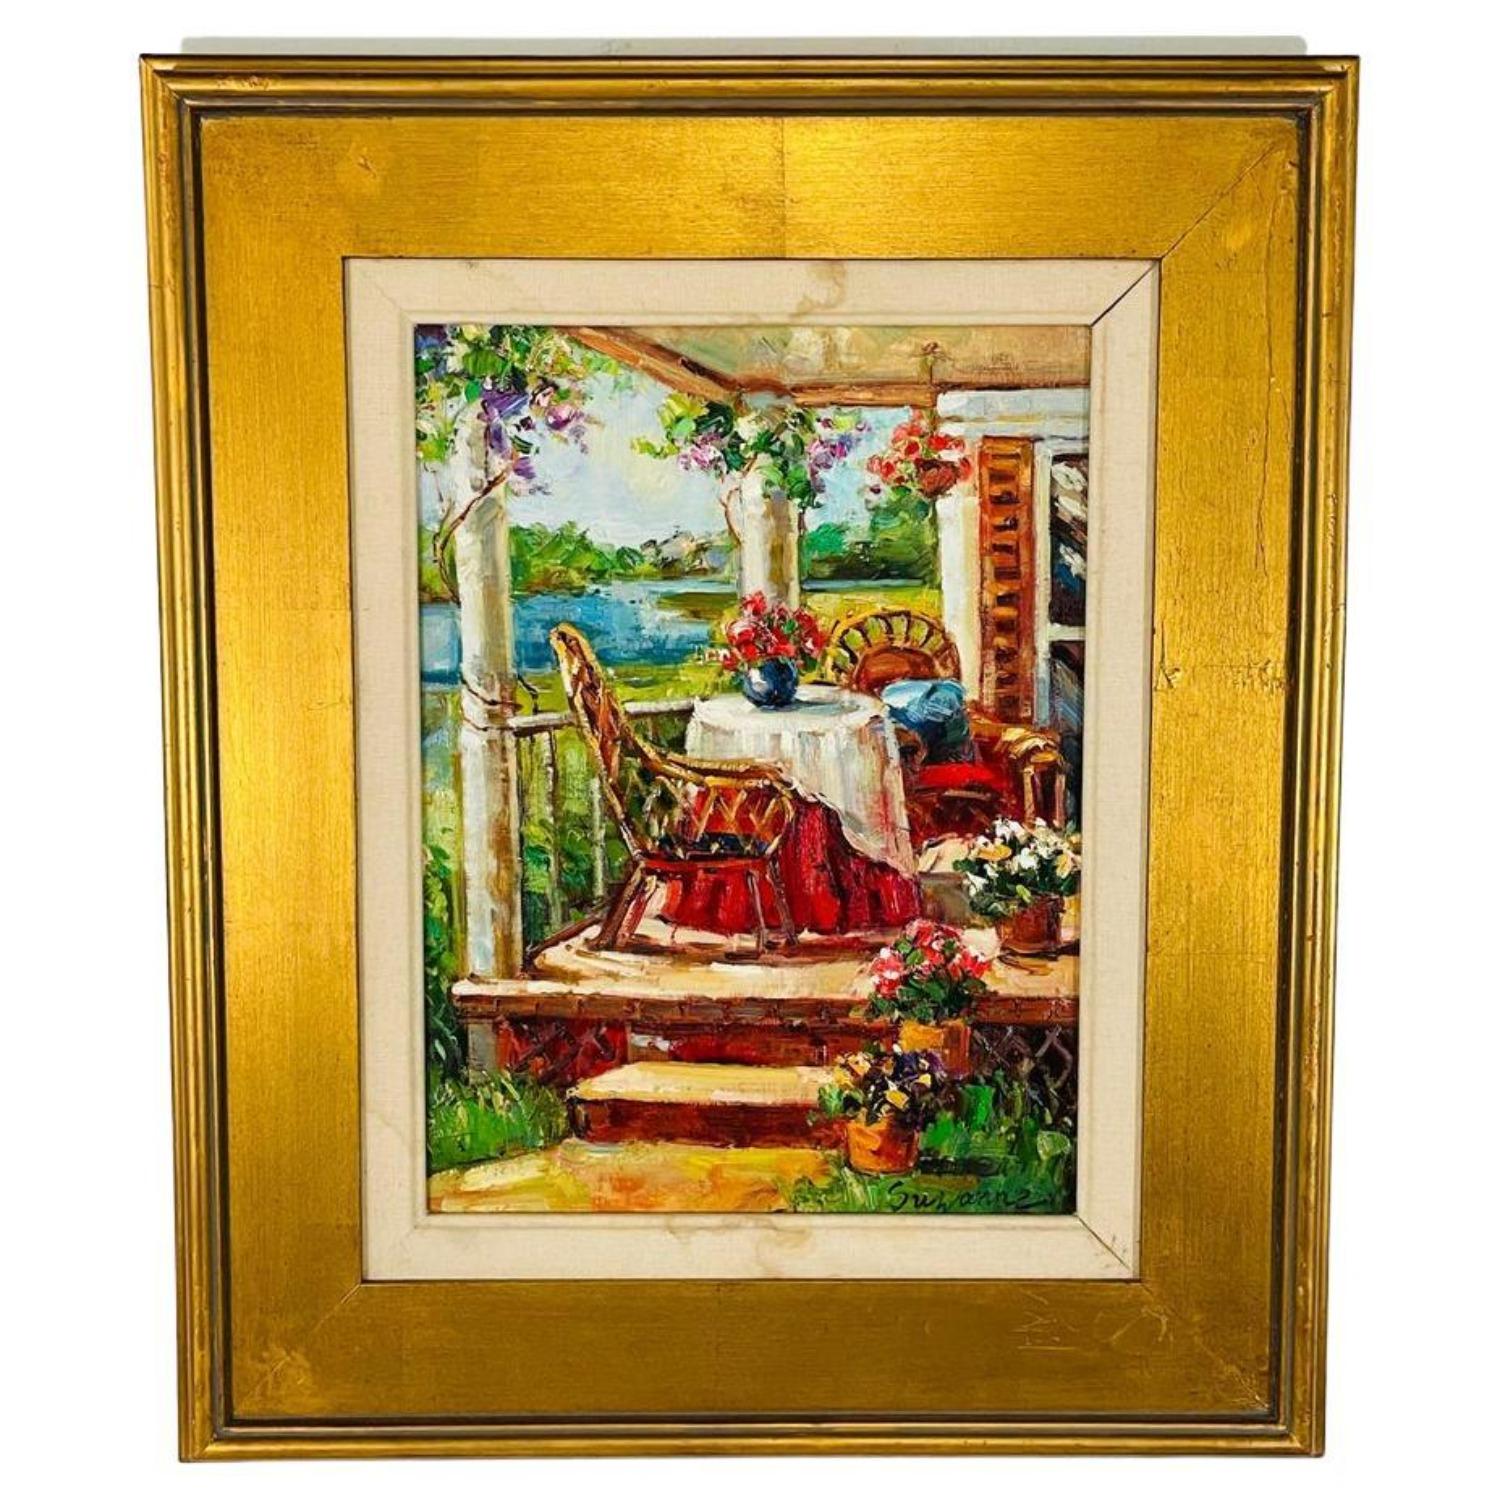 Unknown Landscape Painting - Vintage Oil on Canvas Painting of a Home Porch Signed by Artist in Gilt Frame